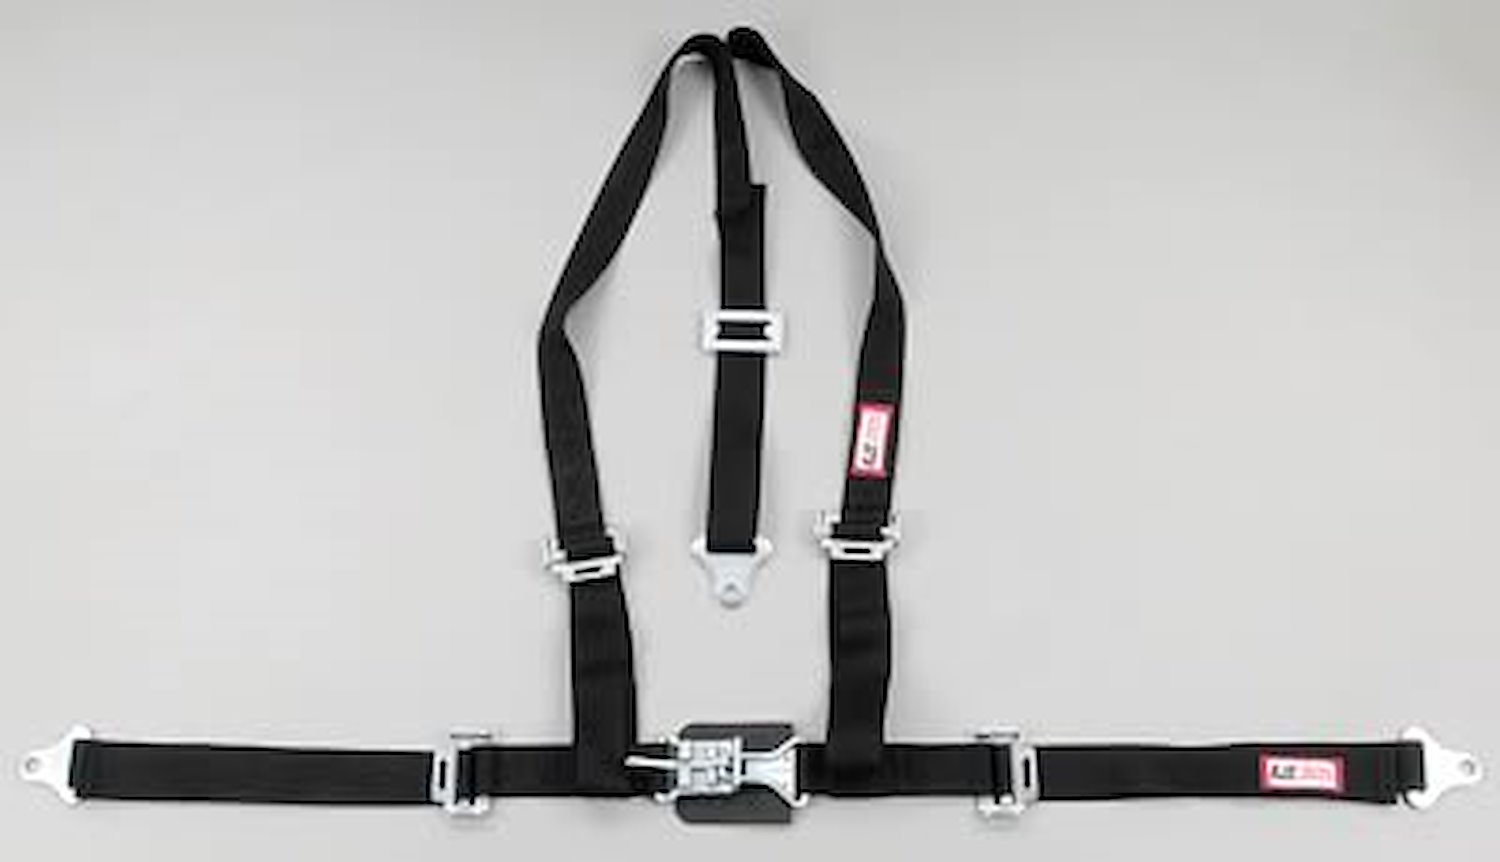 NON-SFI L&L HARNESS 2 PULL DOWN Lap Belt SNAP SEWN IN 2 S.H. Individual ROLL BAR Mount WRAP/SNAP GRAY